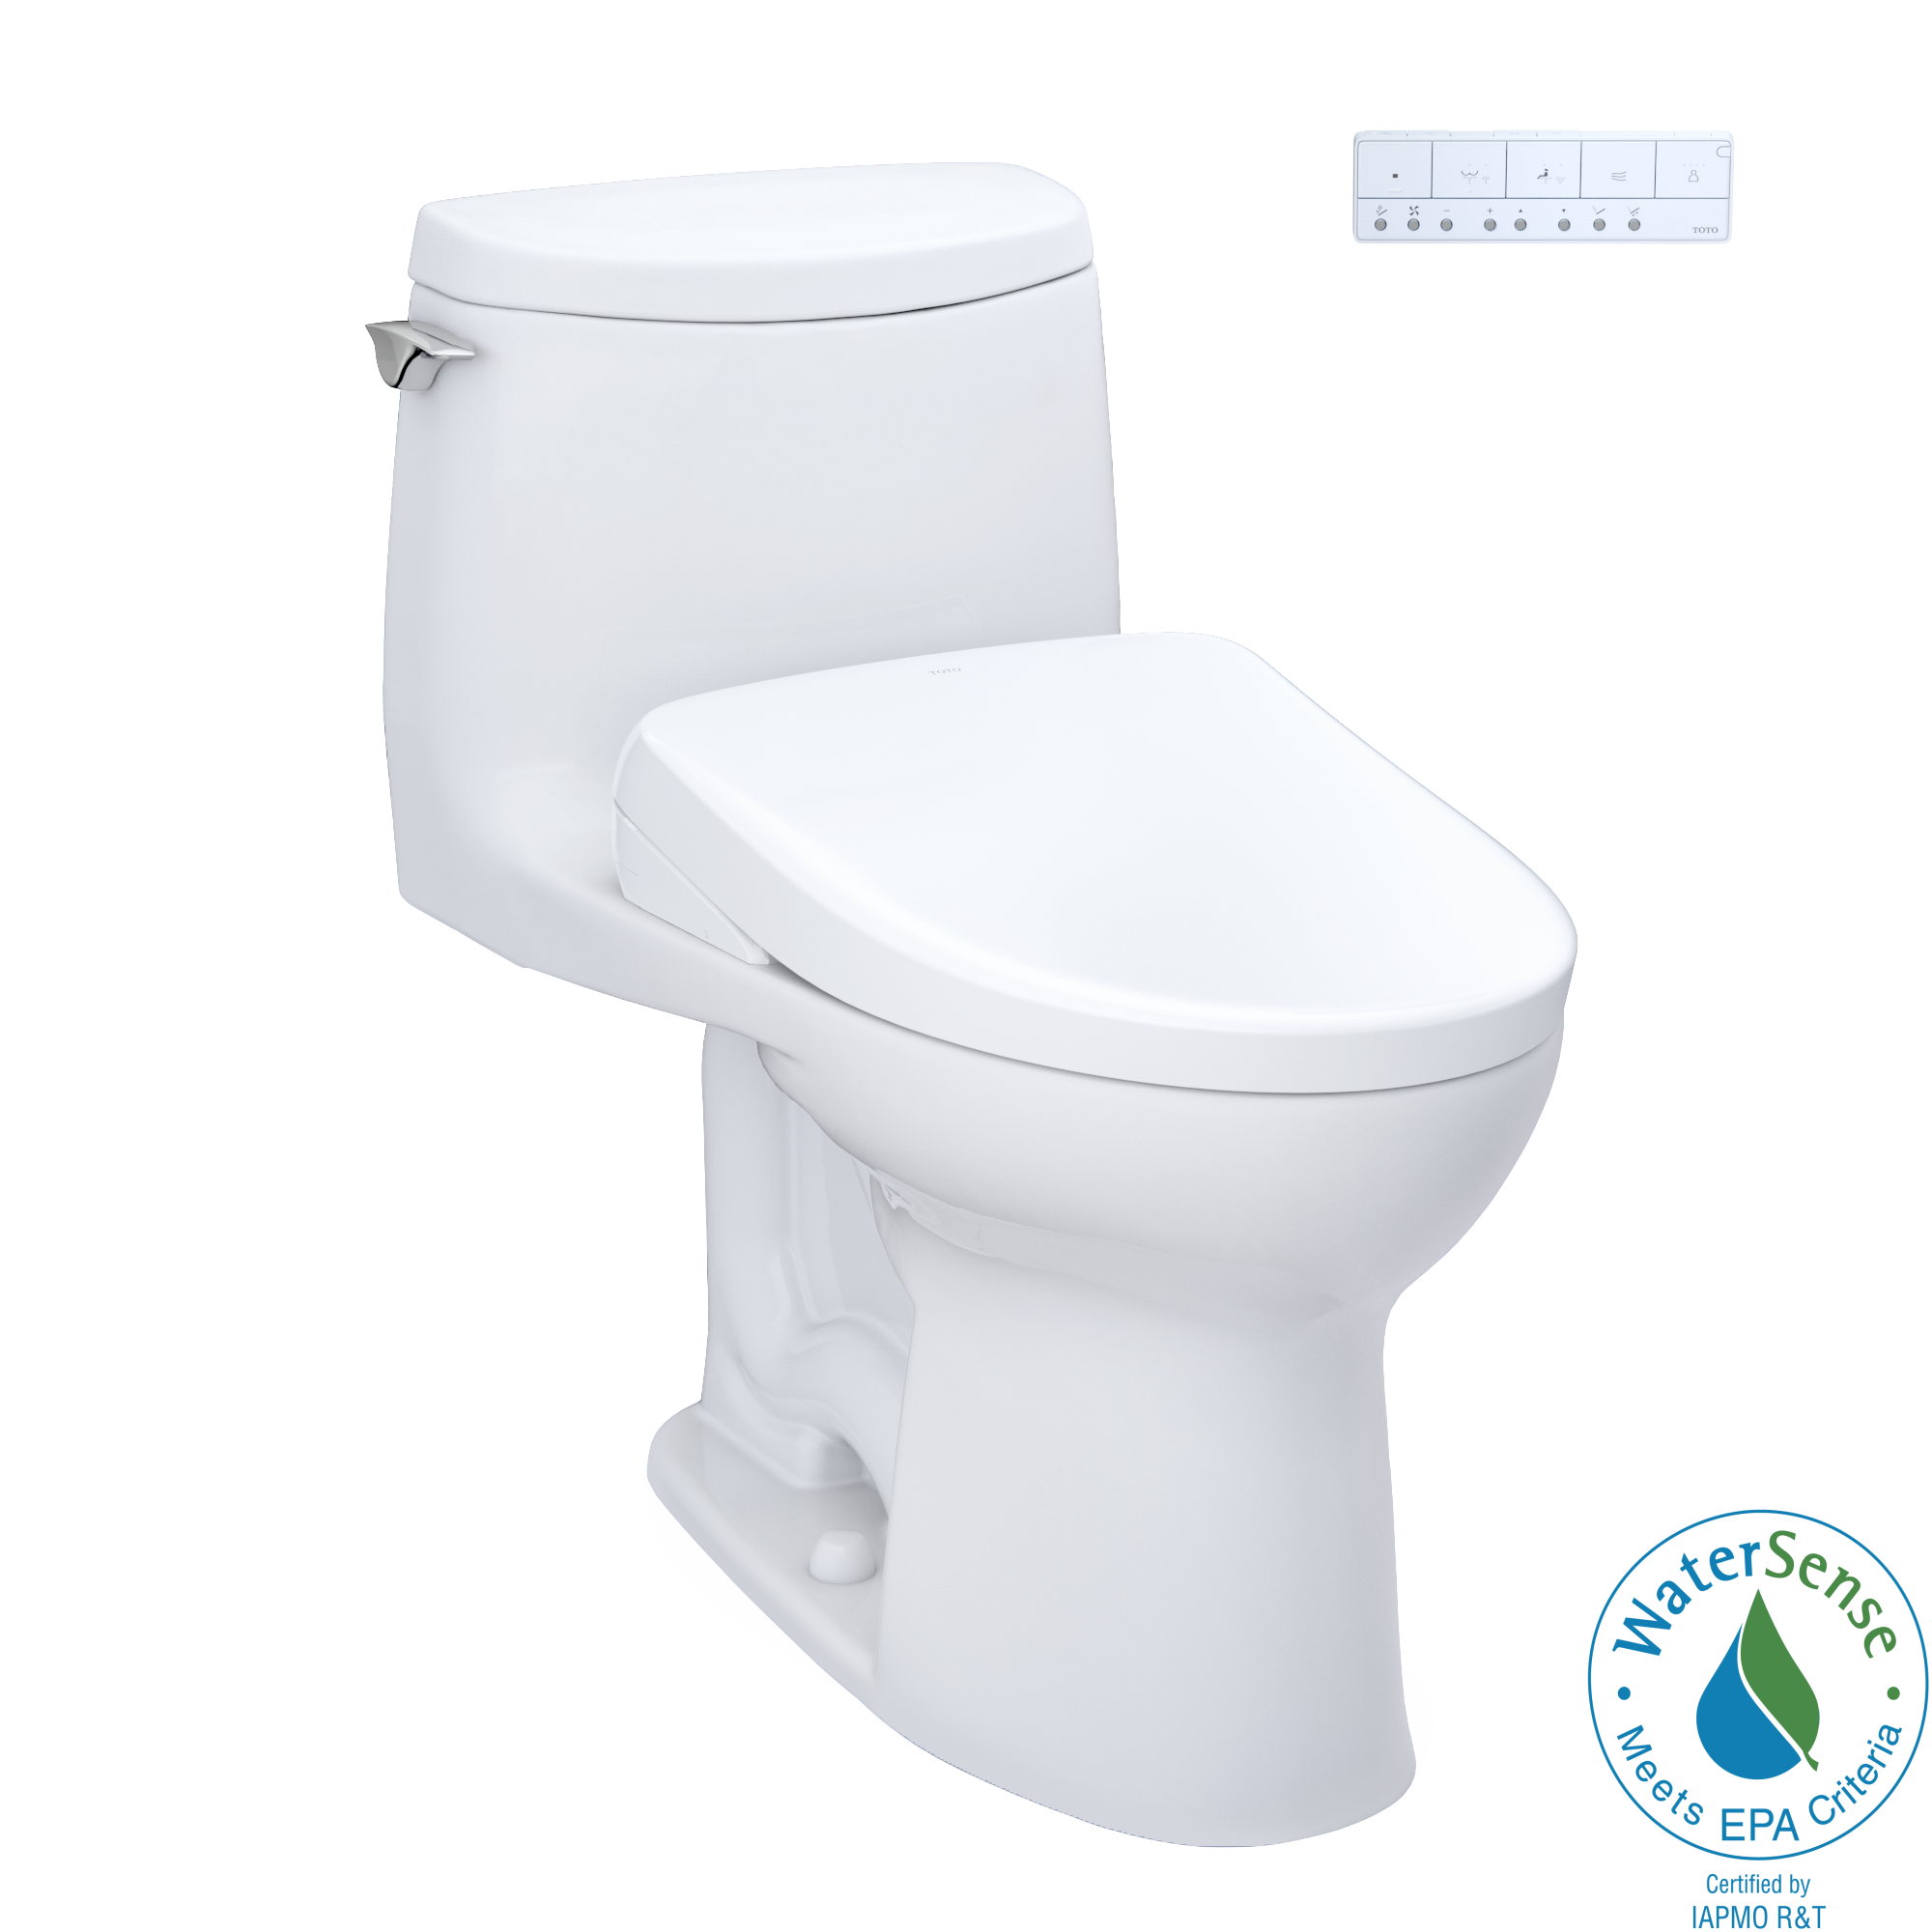 TOTO WASHLET+ UltraMax II 1G One-Piece Elongated 1.0 GPF Toilet and WASHLET+ S7 Contemporary Bidet Seat, Cotton White - MW6044726CUFG#01, MW6044726CUFGA#01